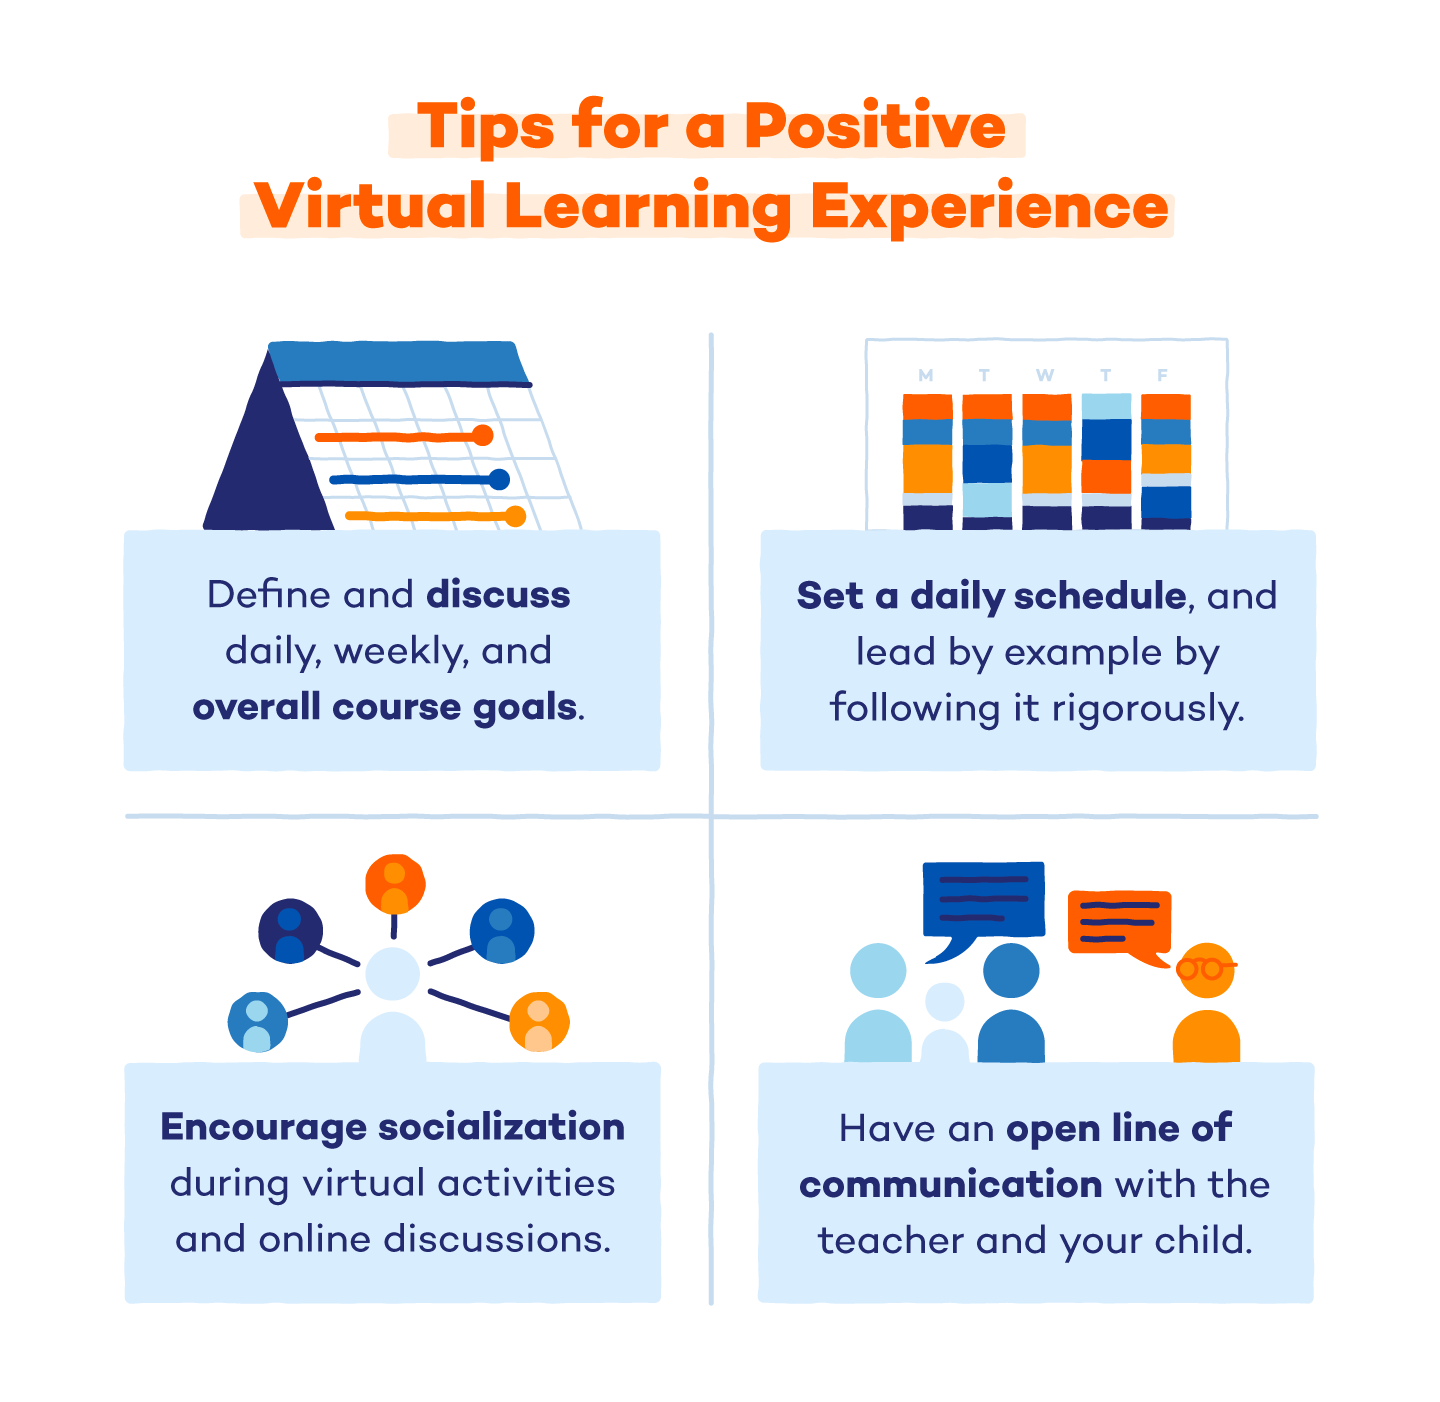 Tips-for-a-positive-virtual-learning-experience